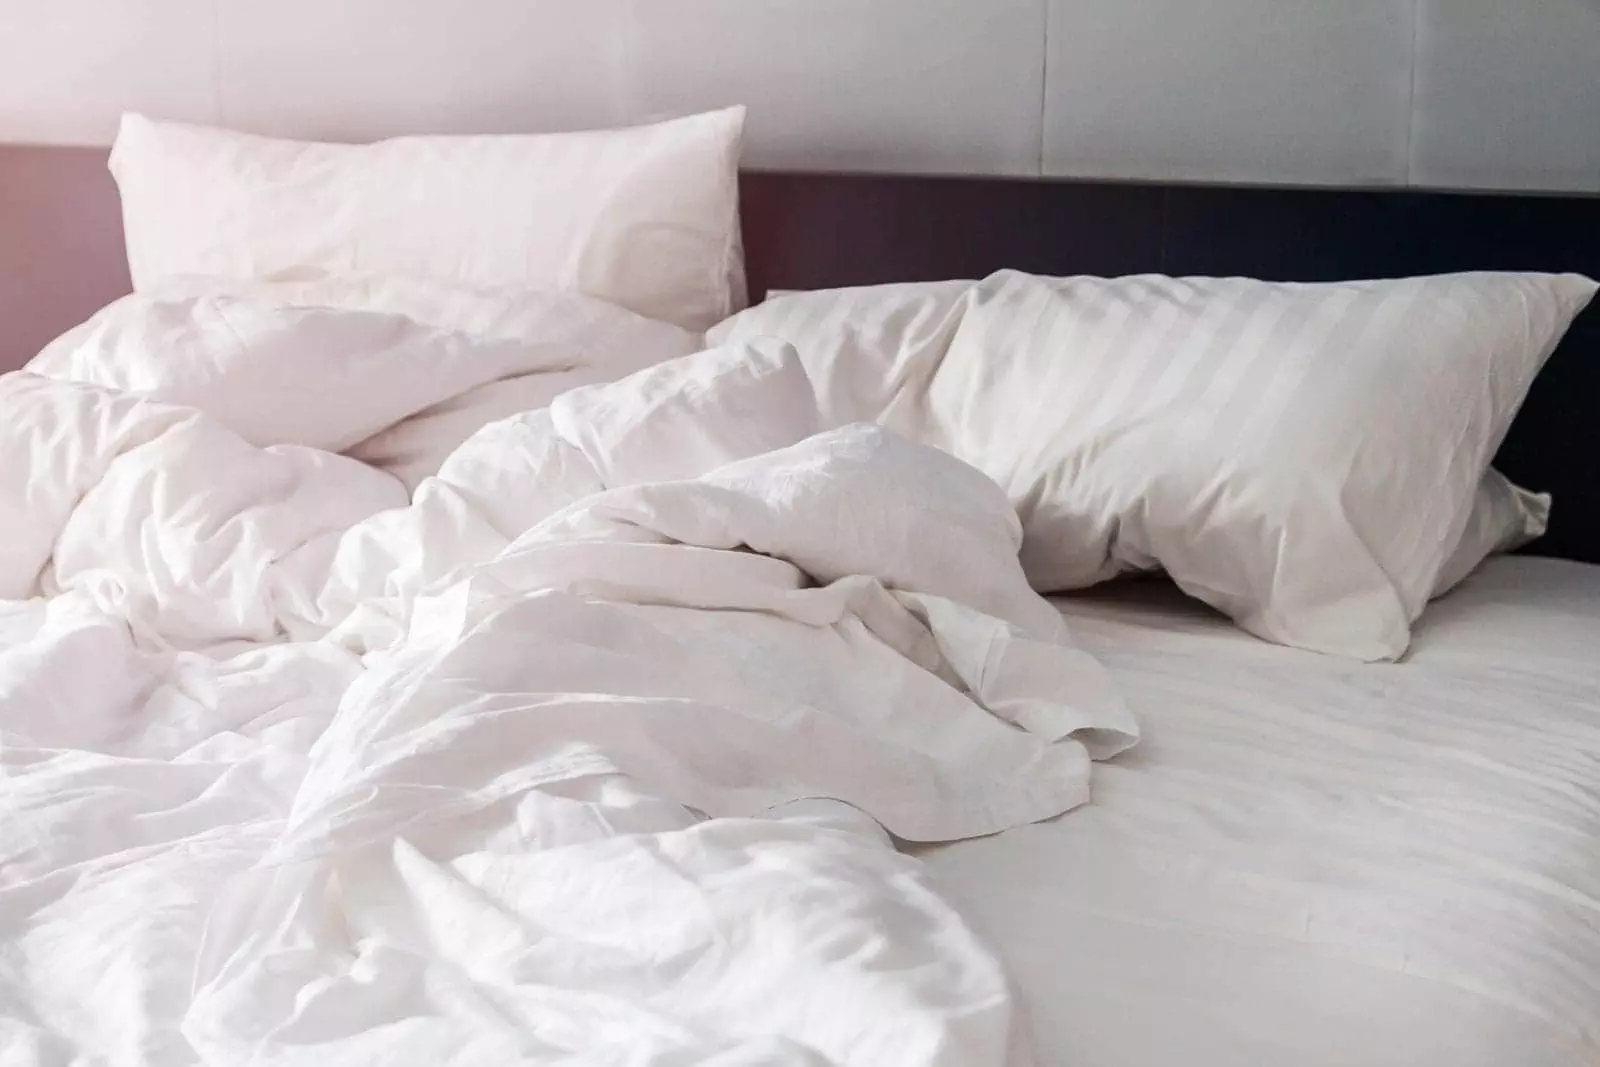 How to Clean a Mattress: 8 Cleaning Tips 2